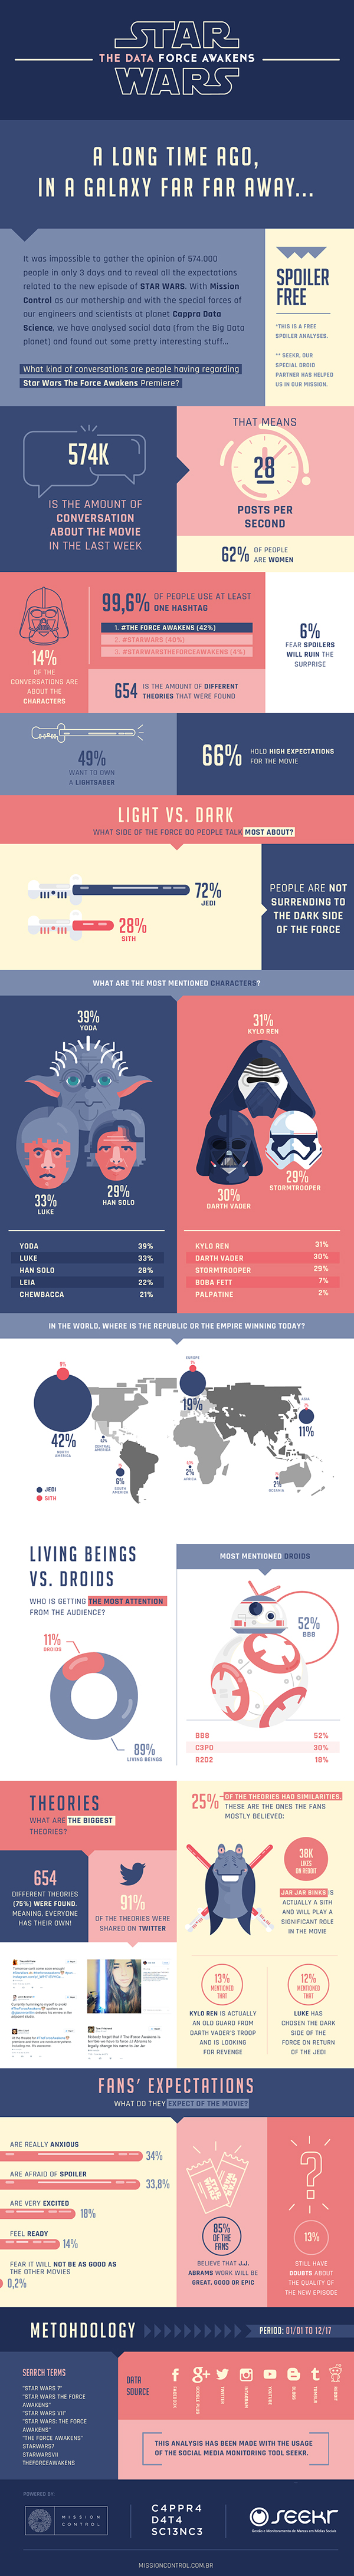 Infographic | Star Wars: The Force Awakens